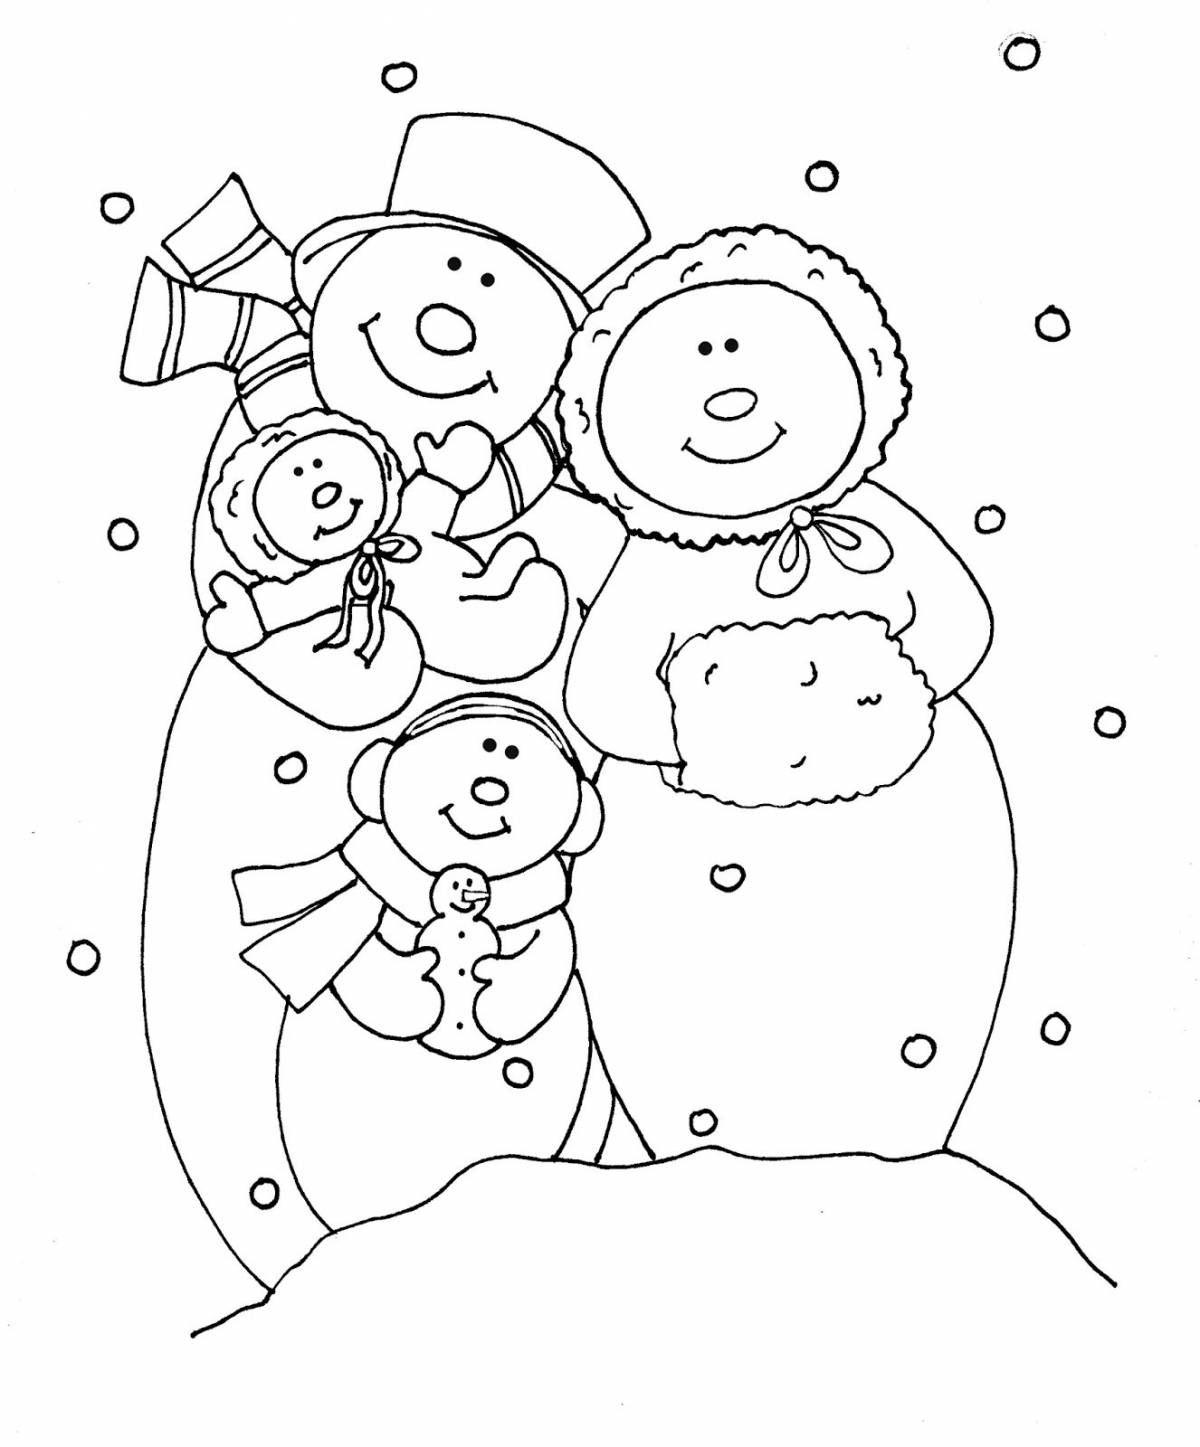 Amazing snowman coloring card